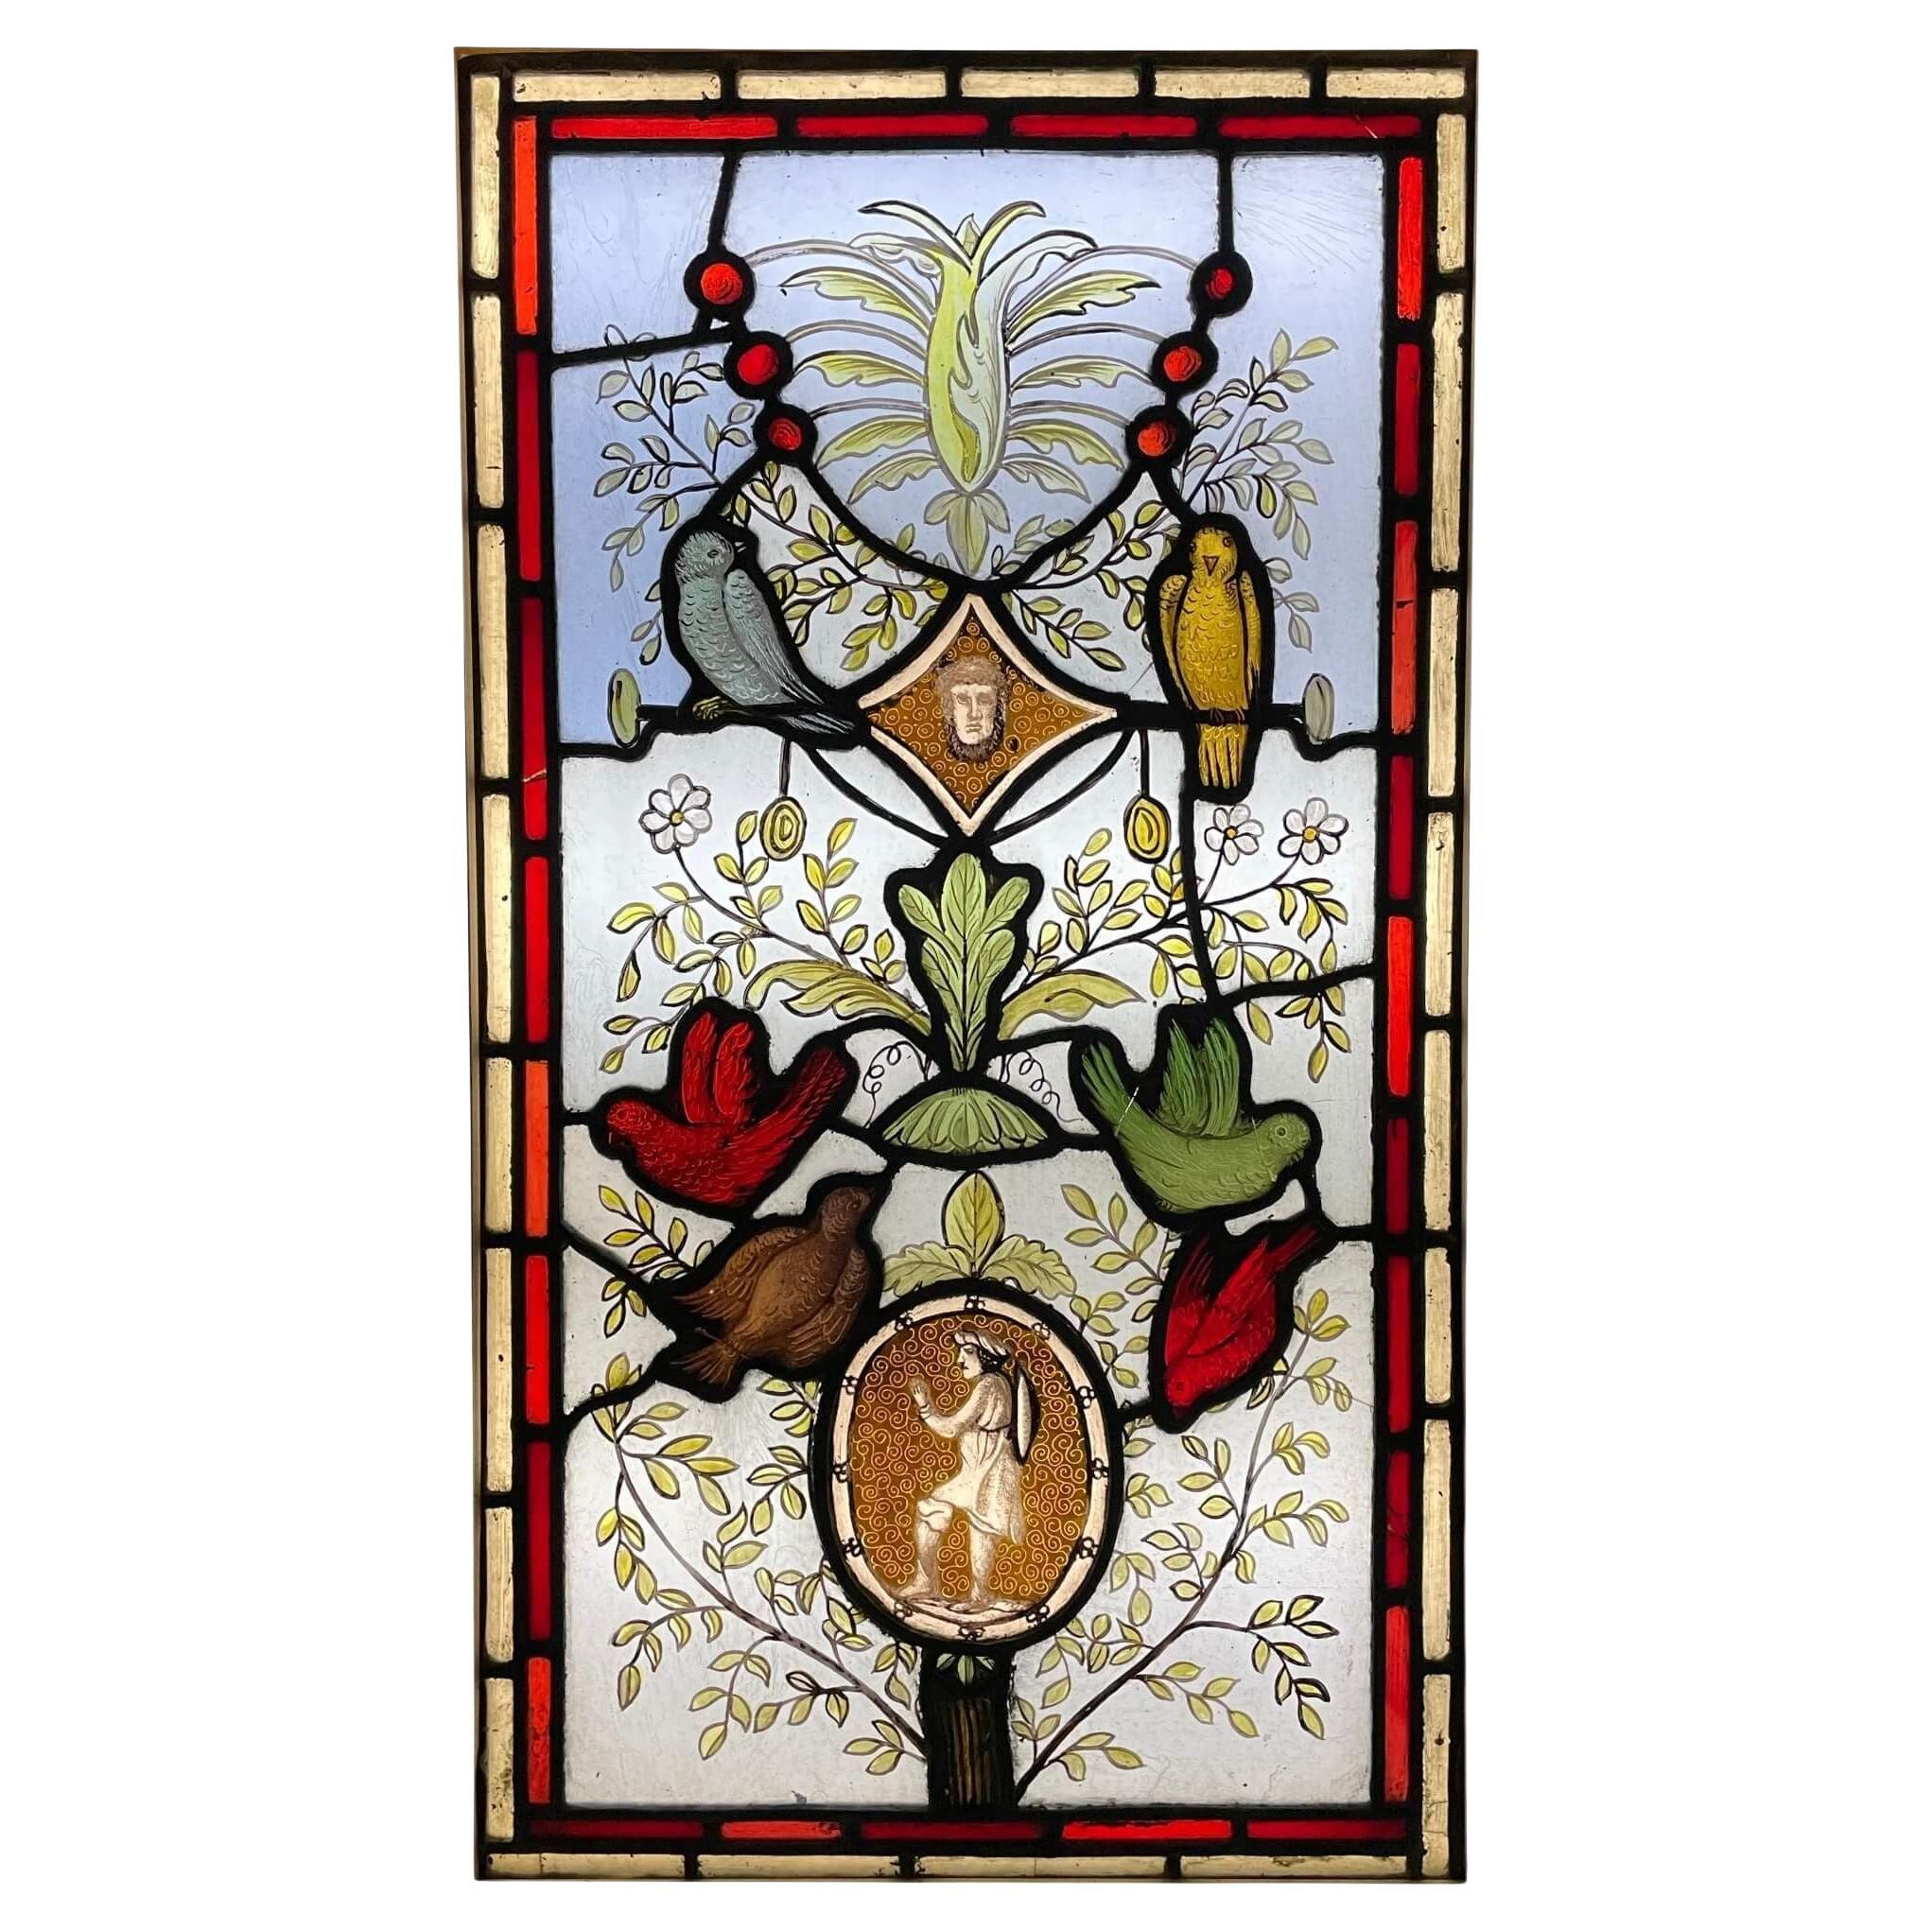 What is the difference between stained glass and painted glass?